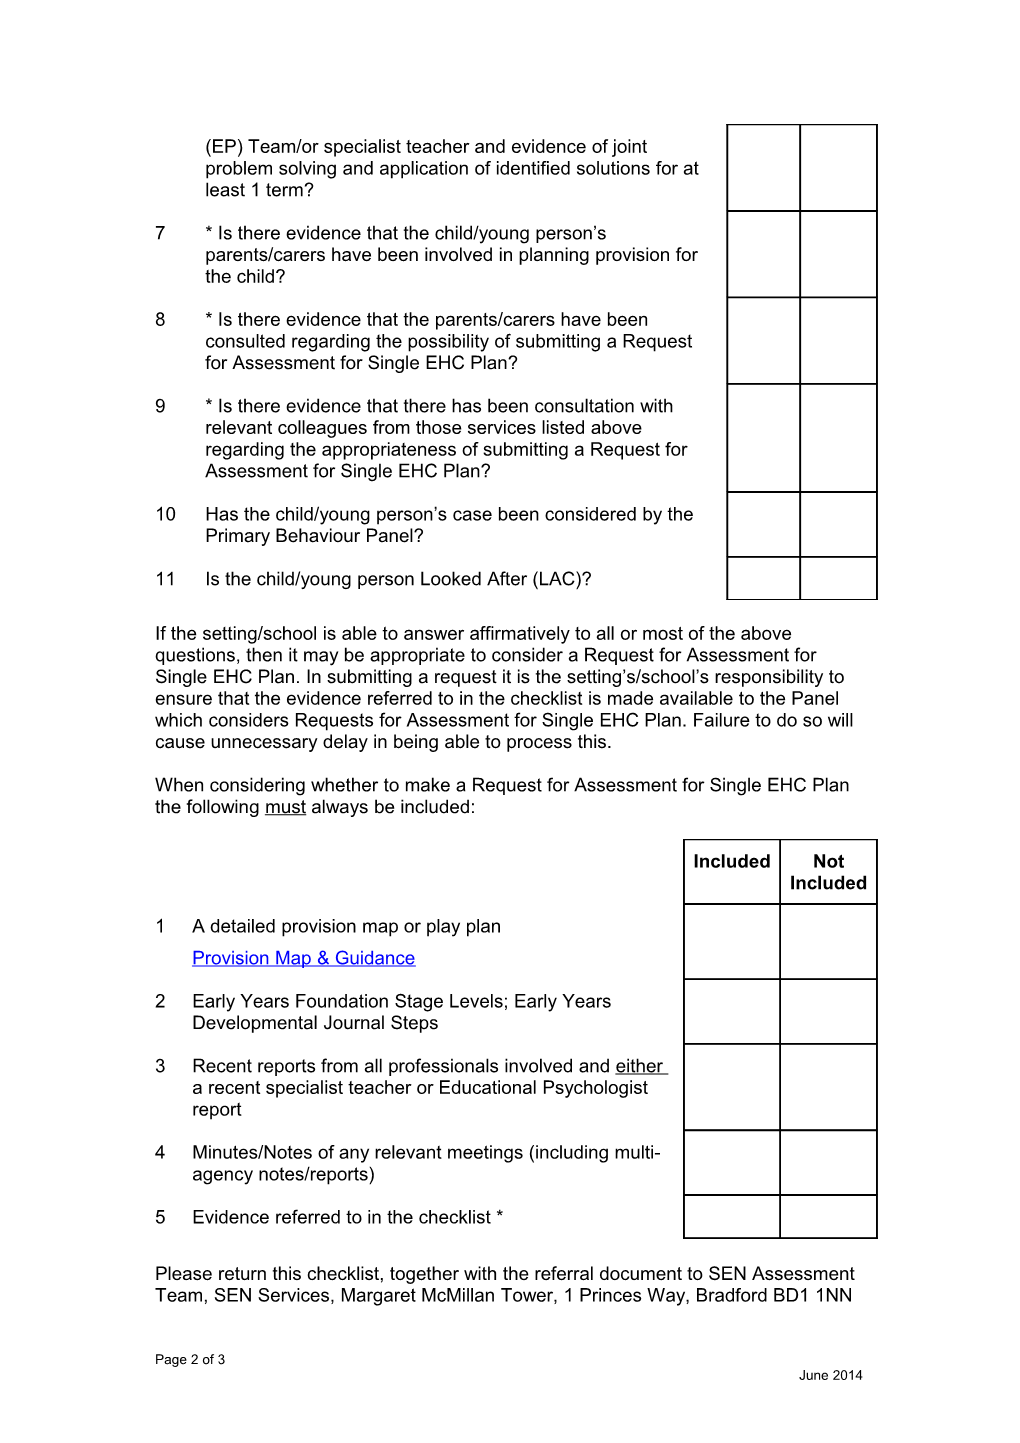 Request for Assessment for Single EHC Plan Checklist for Children in the Early Years Foundation